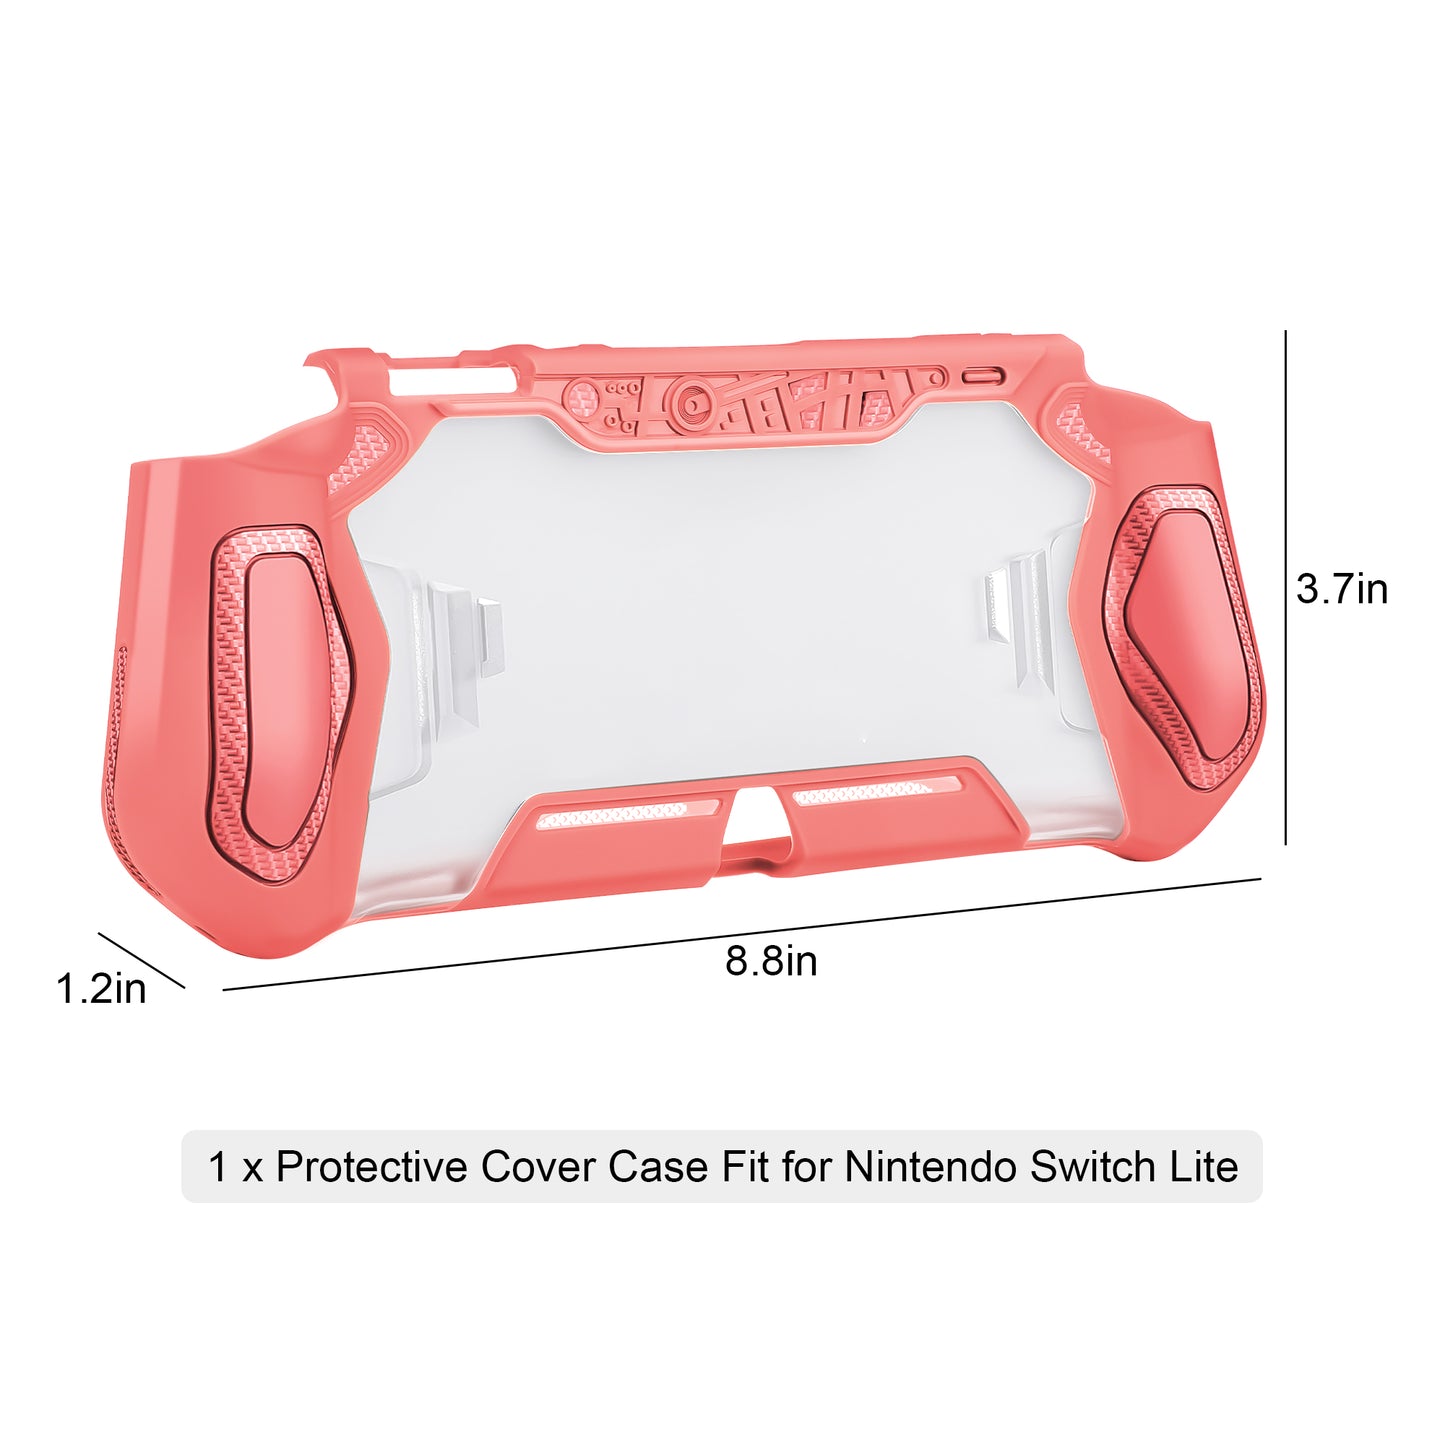 TPU Protective Cover Case Fit for Nintendo Switch Lite - Shockproof Grip Handle Hard Shell with Ergonomic Grip, Shockproof Anti-Scratch (Coral)